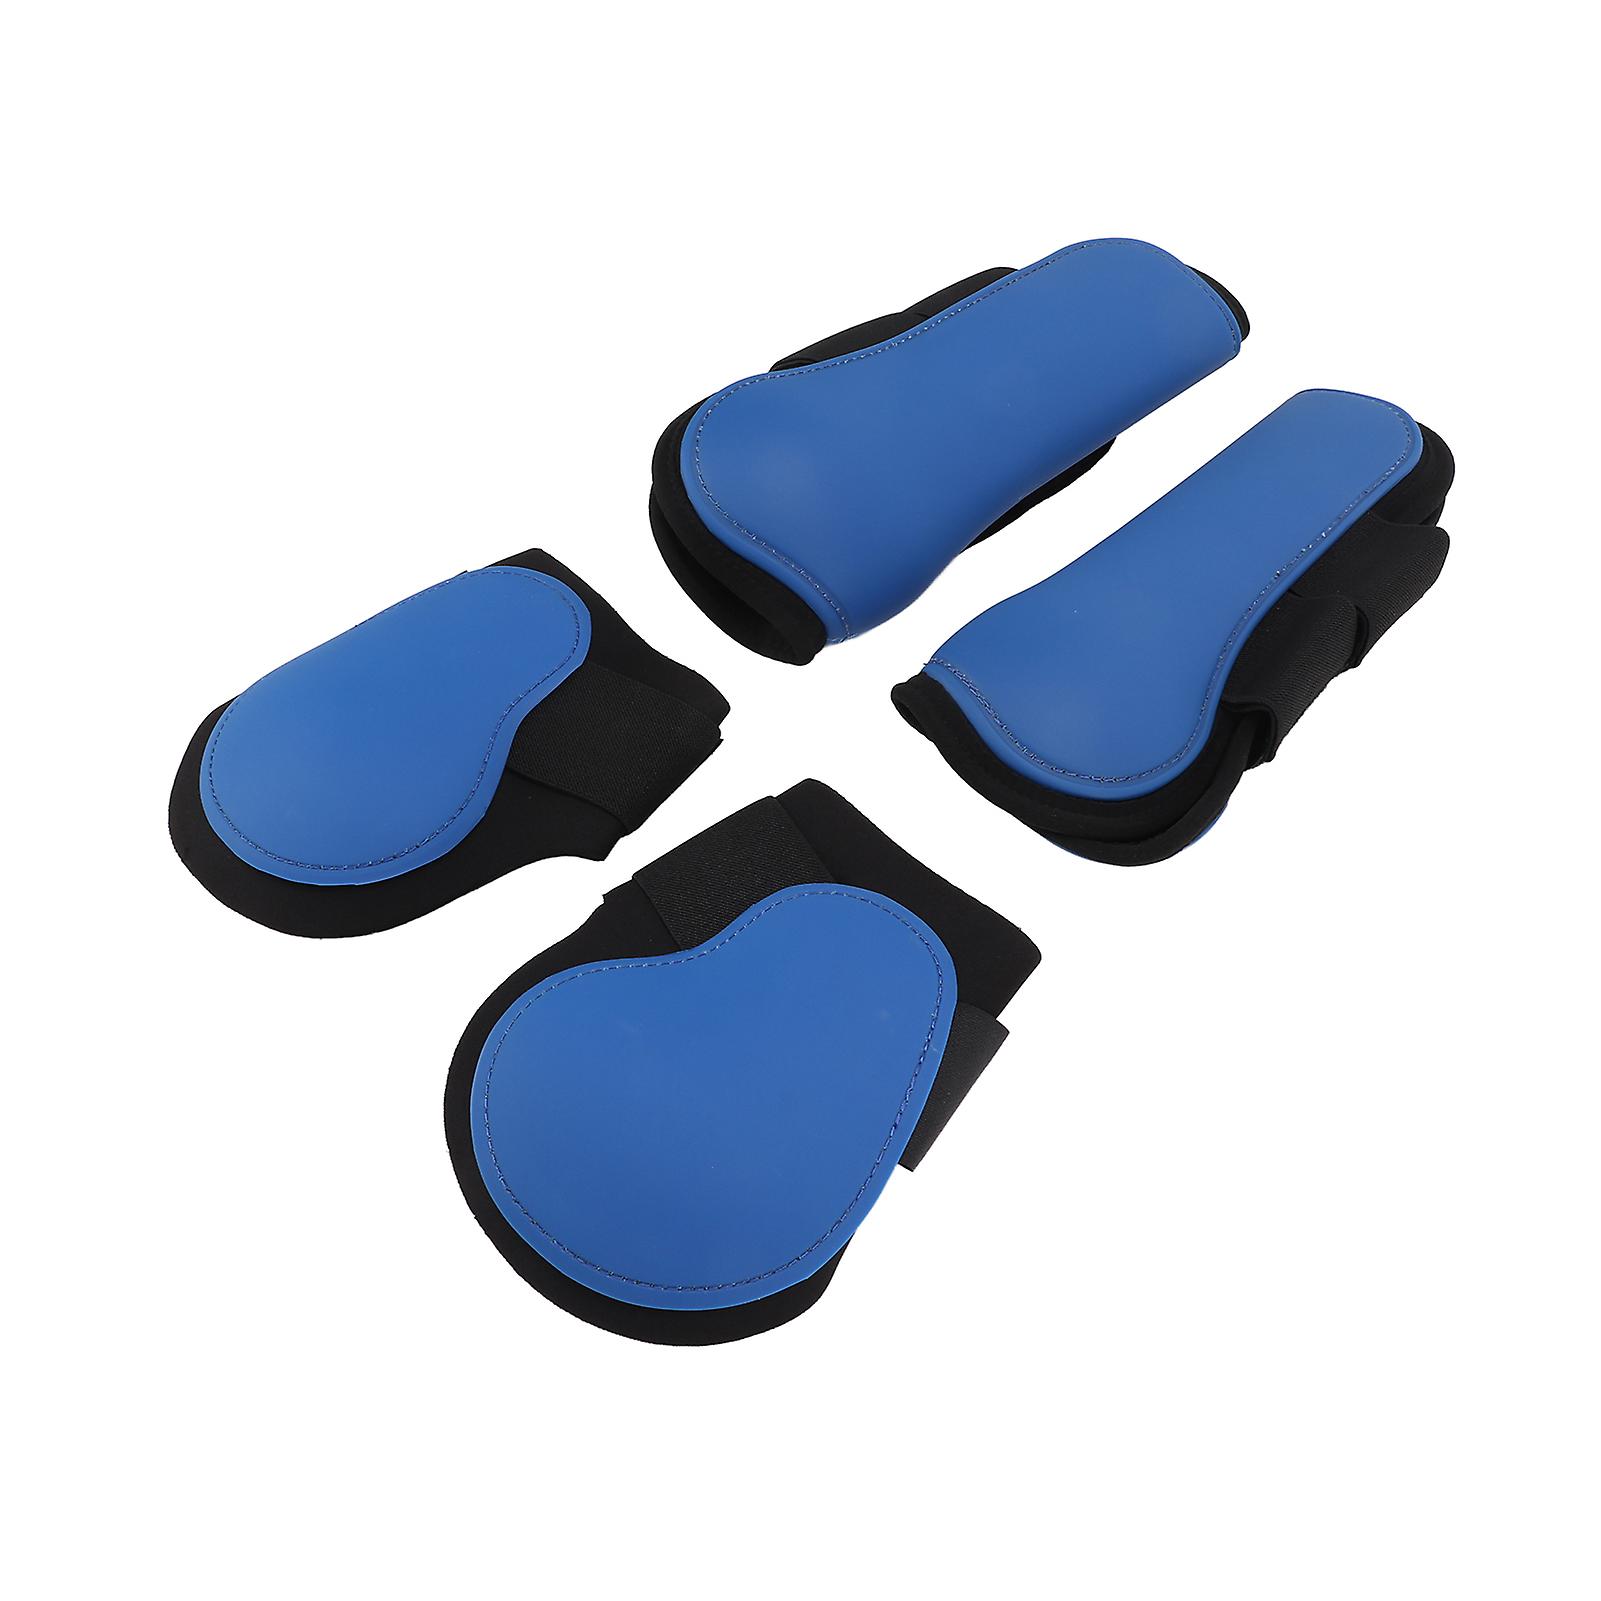 4pcs Horse Leg Boots Set Pu Horse Front And Rear Leg Brace Guards With Cushioning Inner Pad For Tendon Protectionblue Set L